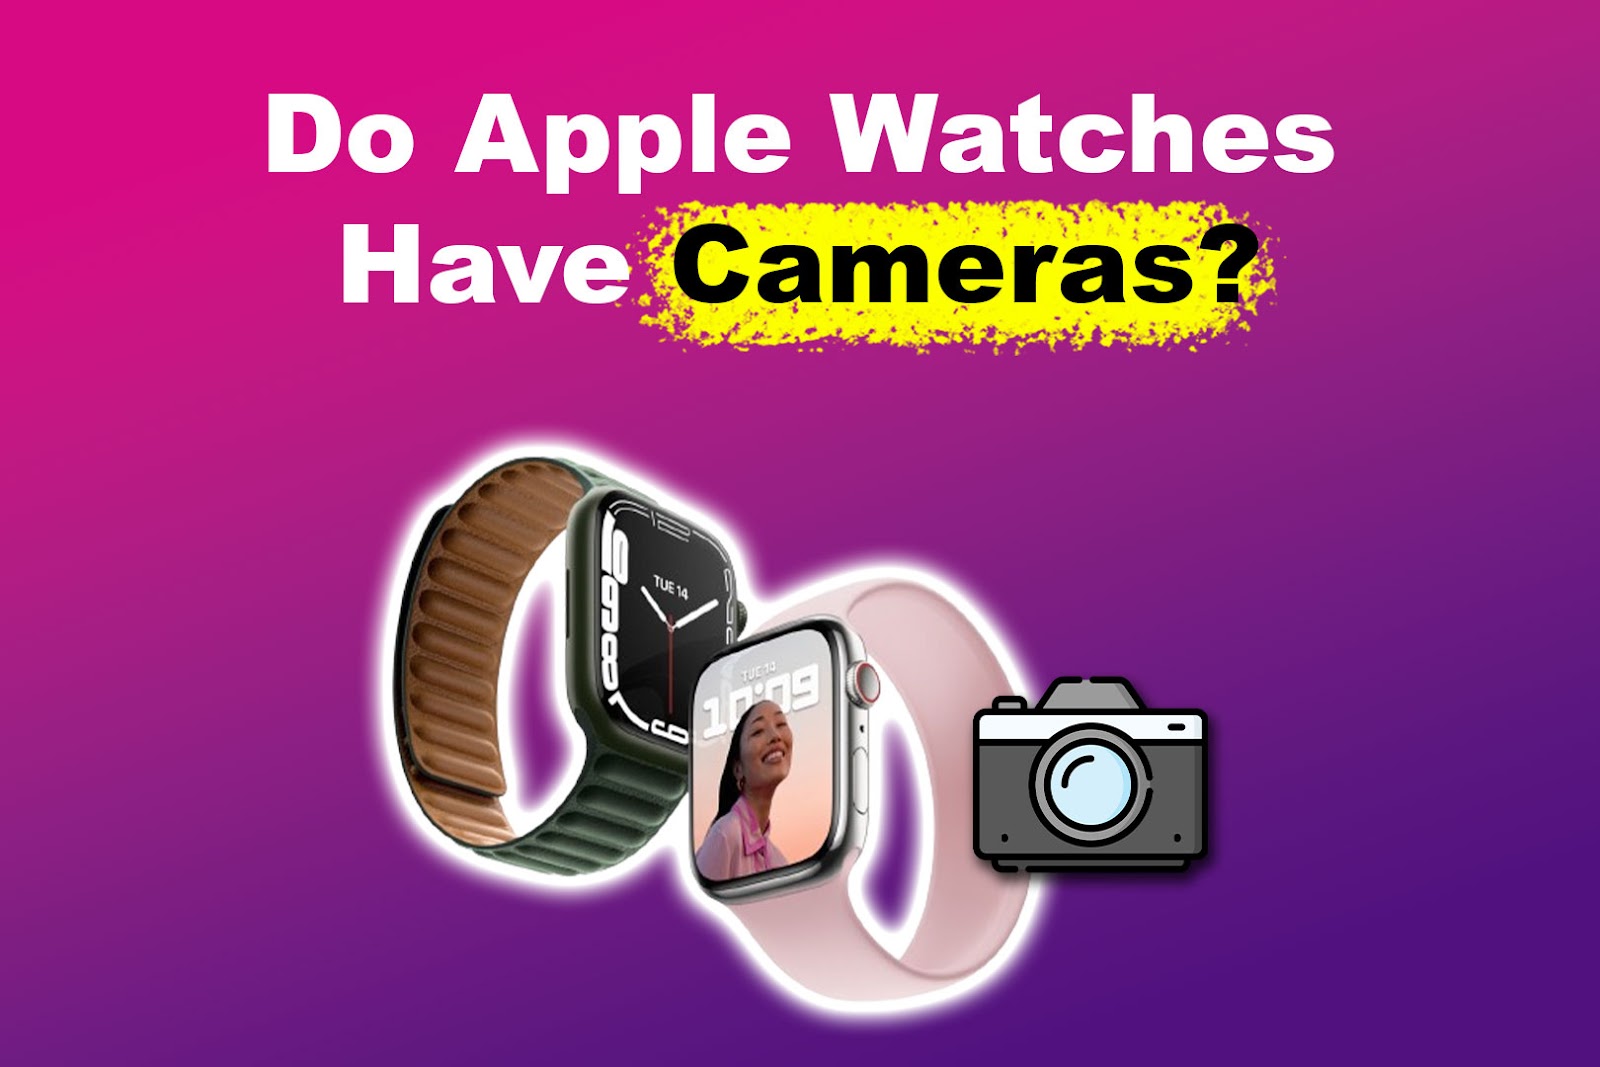 Do Apple Watches Have Cameras